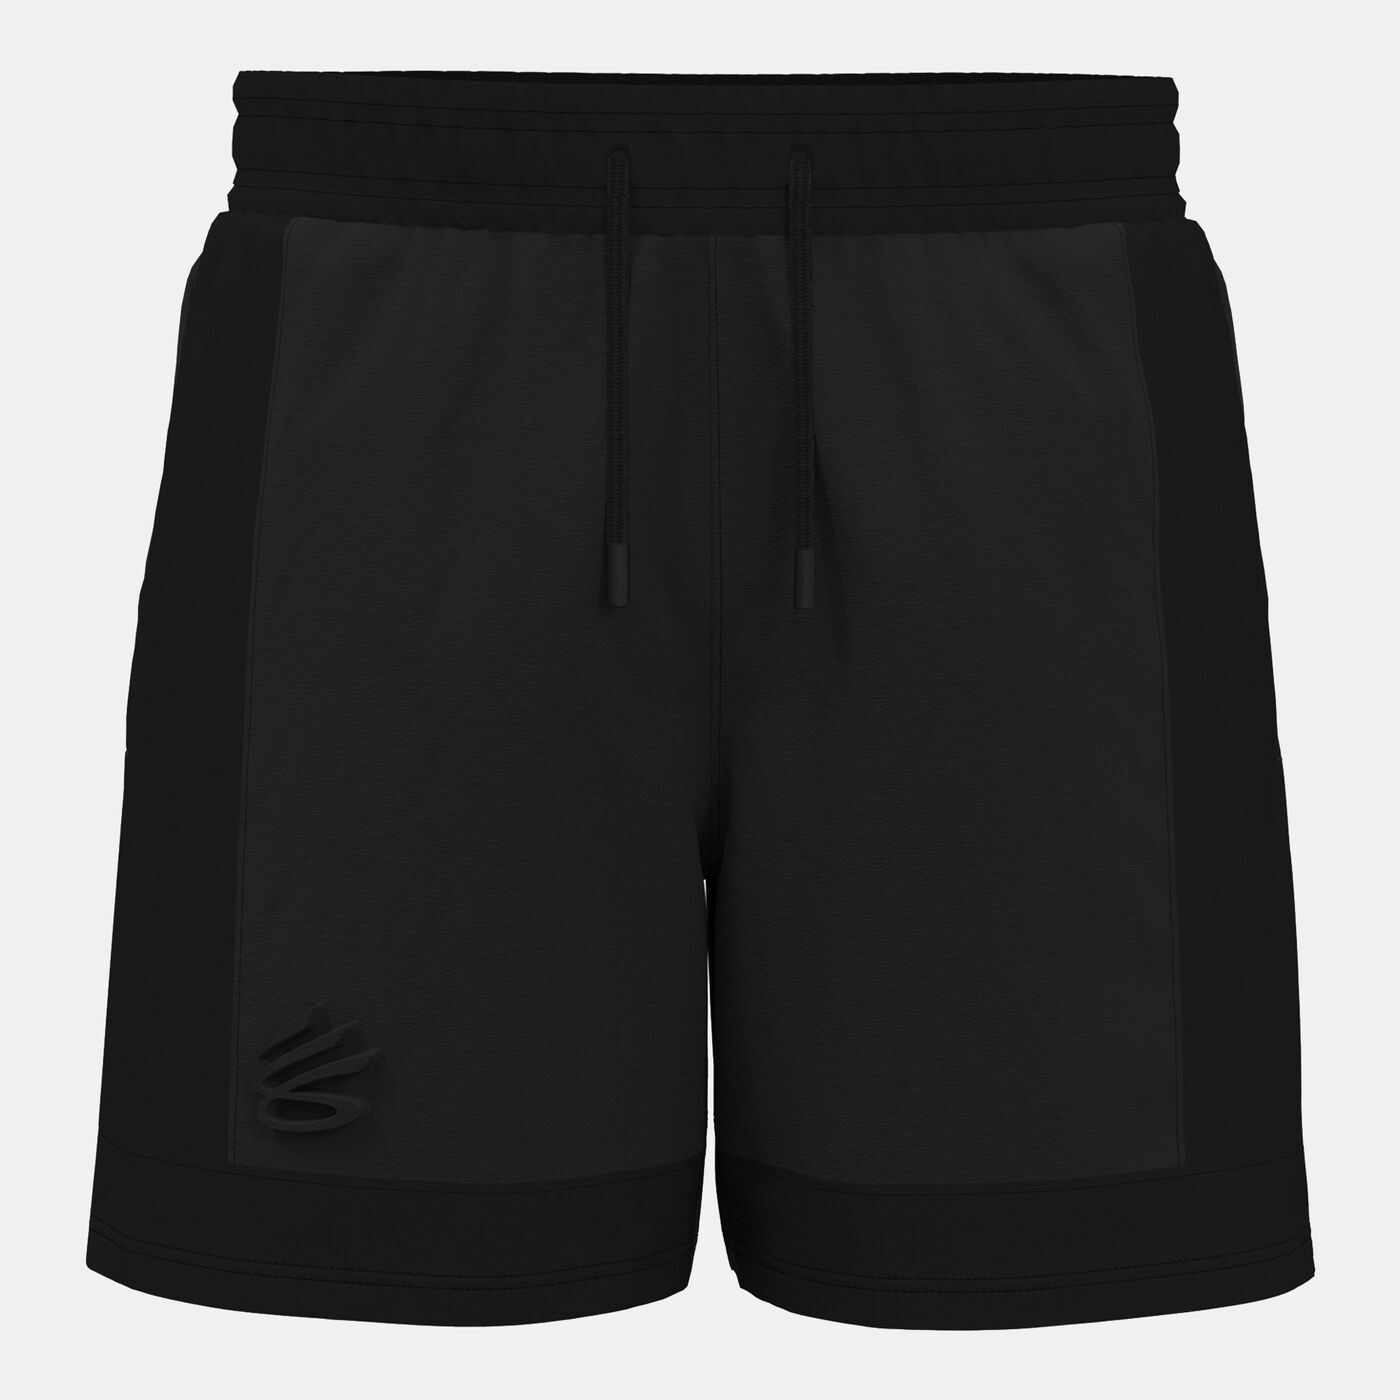 Men's Curry Woven Shorts